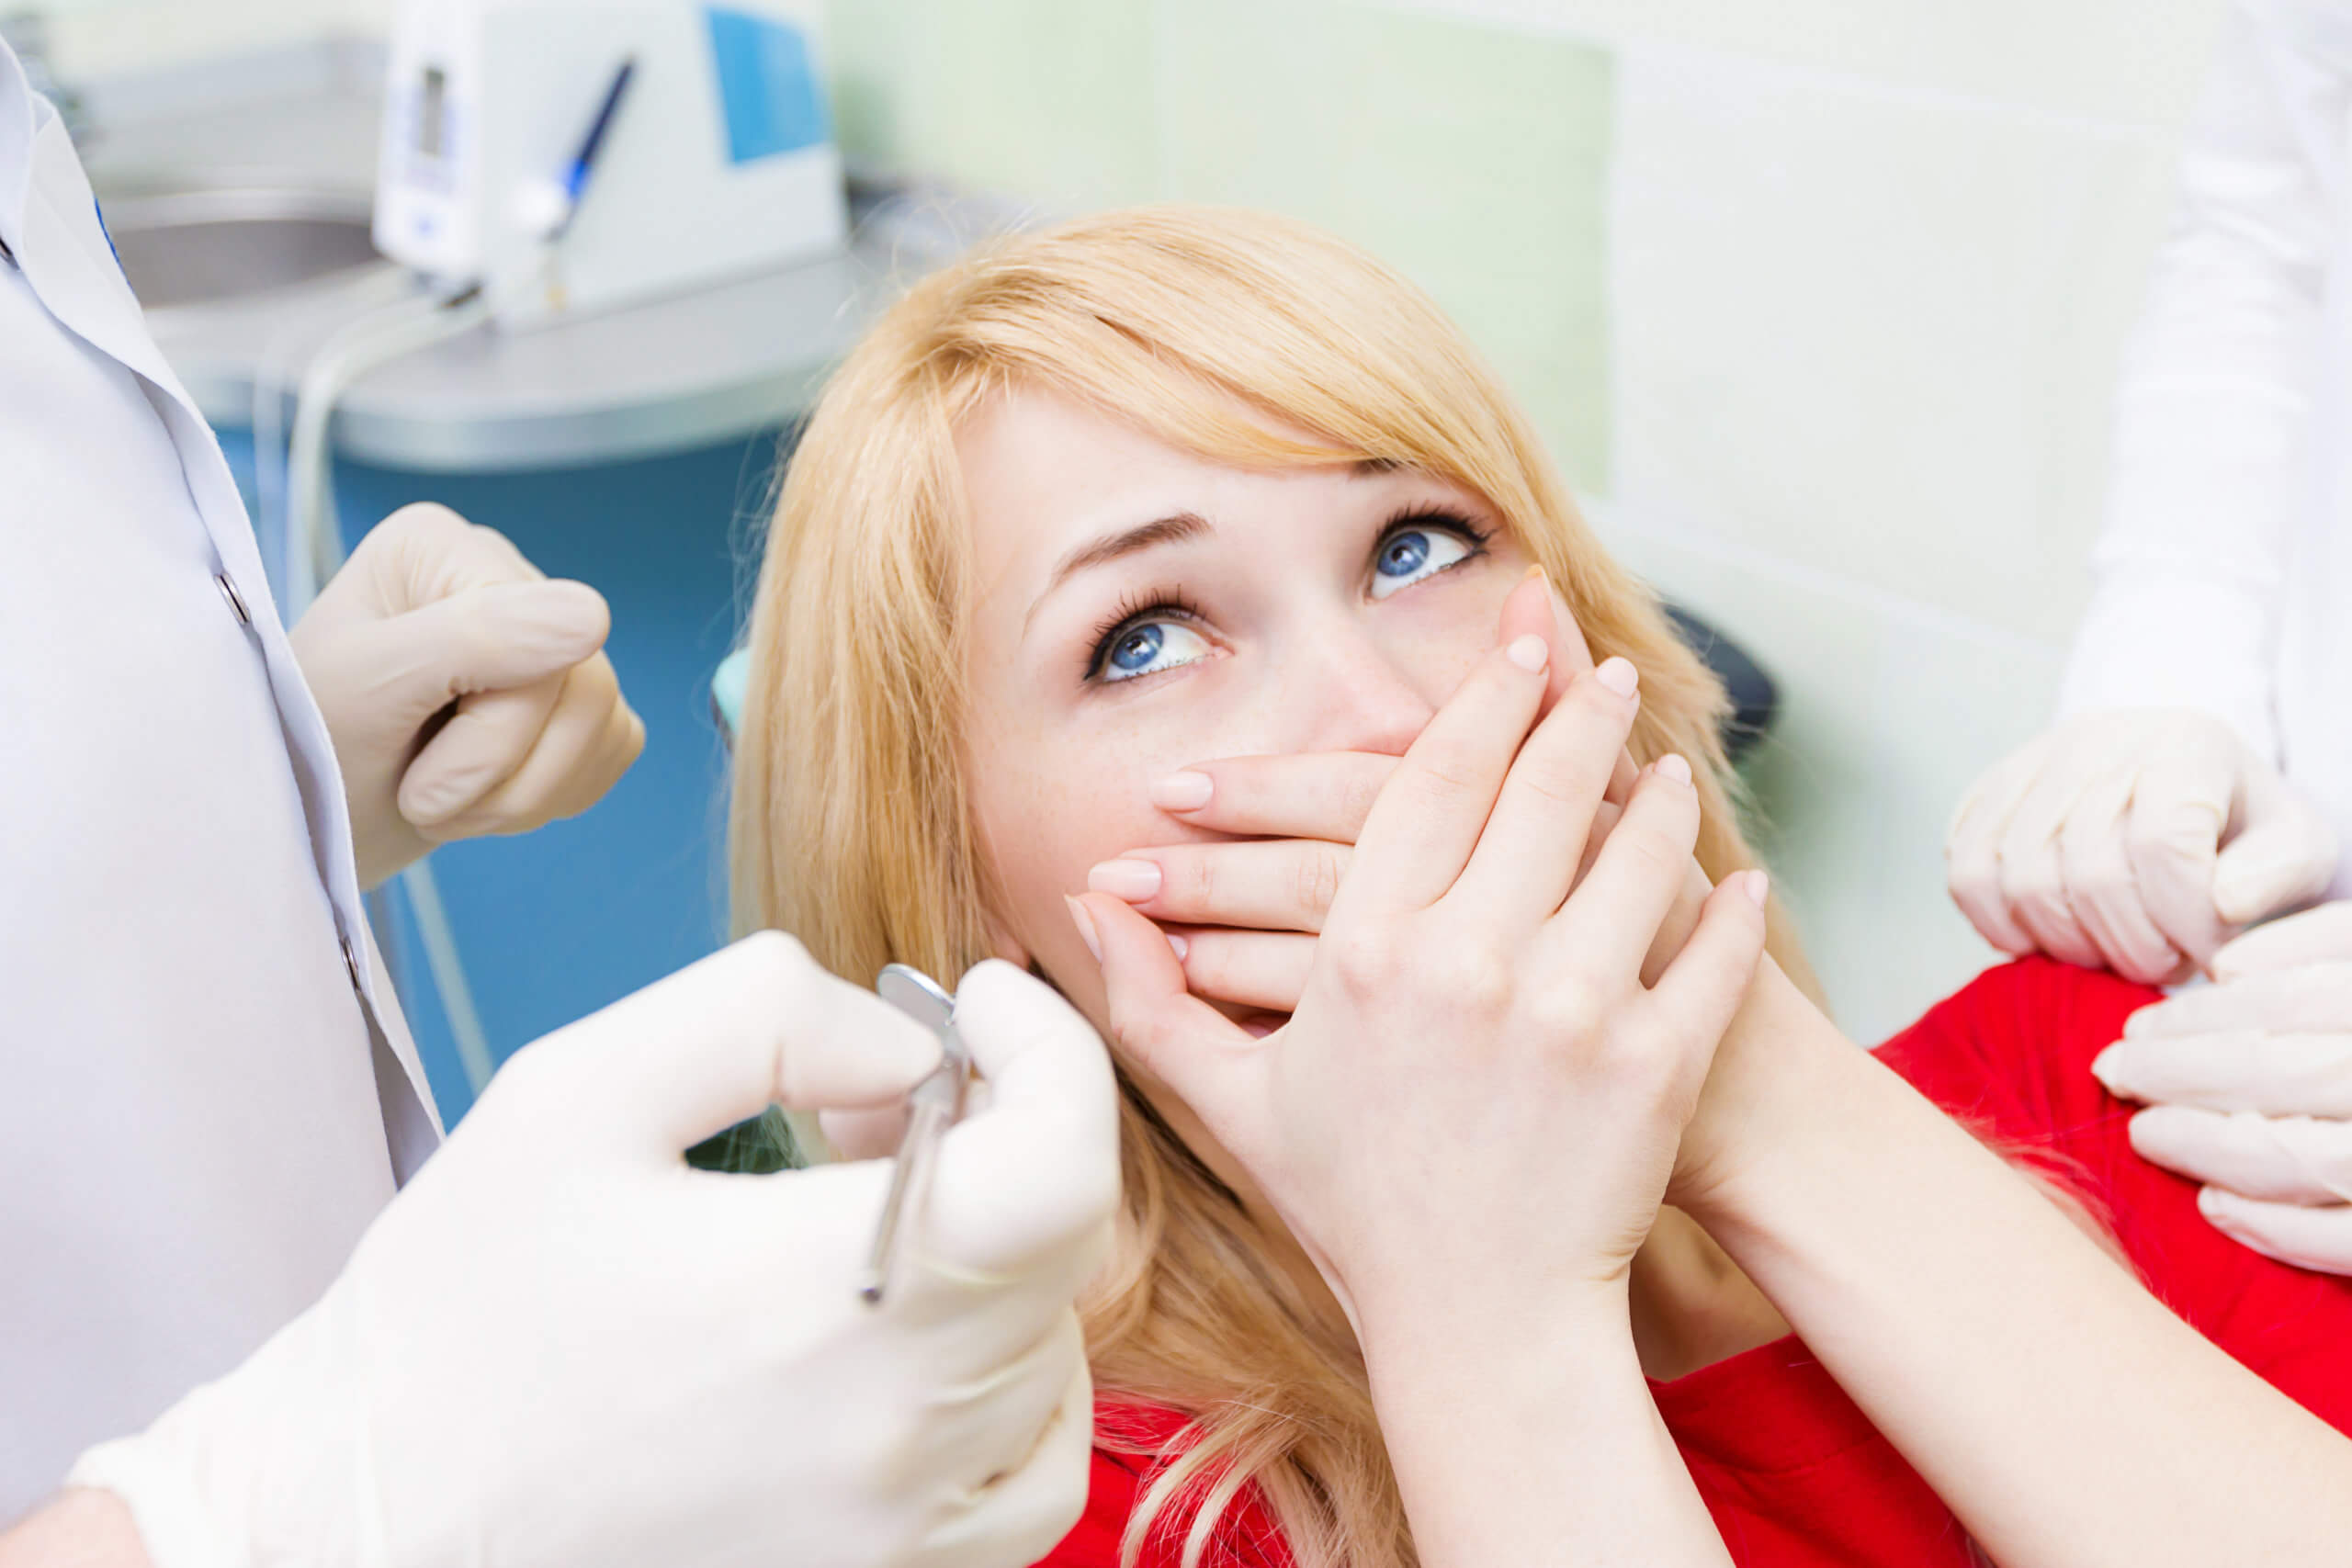 How To Deal With Dental Anxiety and Fear